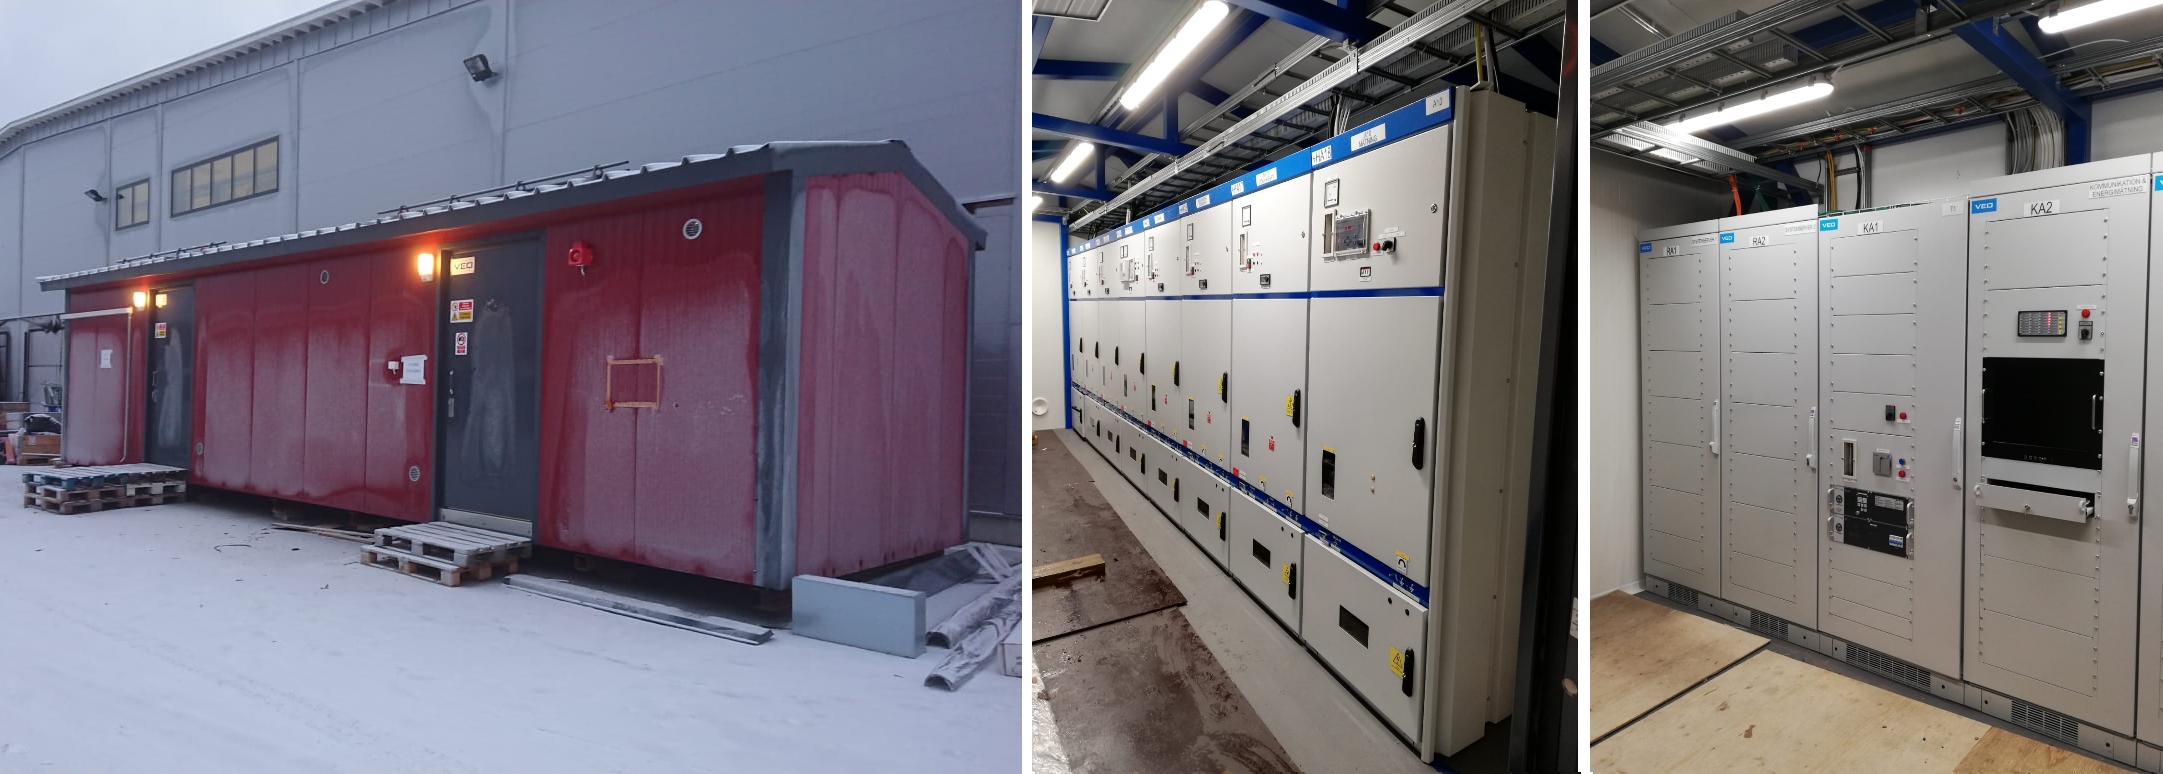 Installations in power stations for VEO 2018.